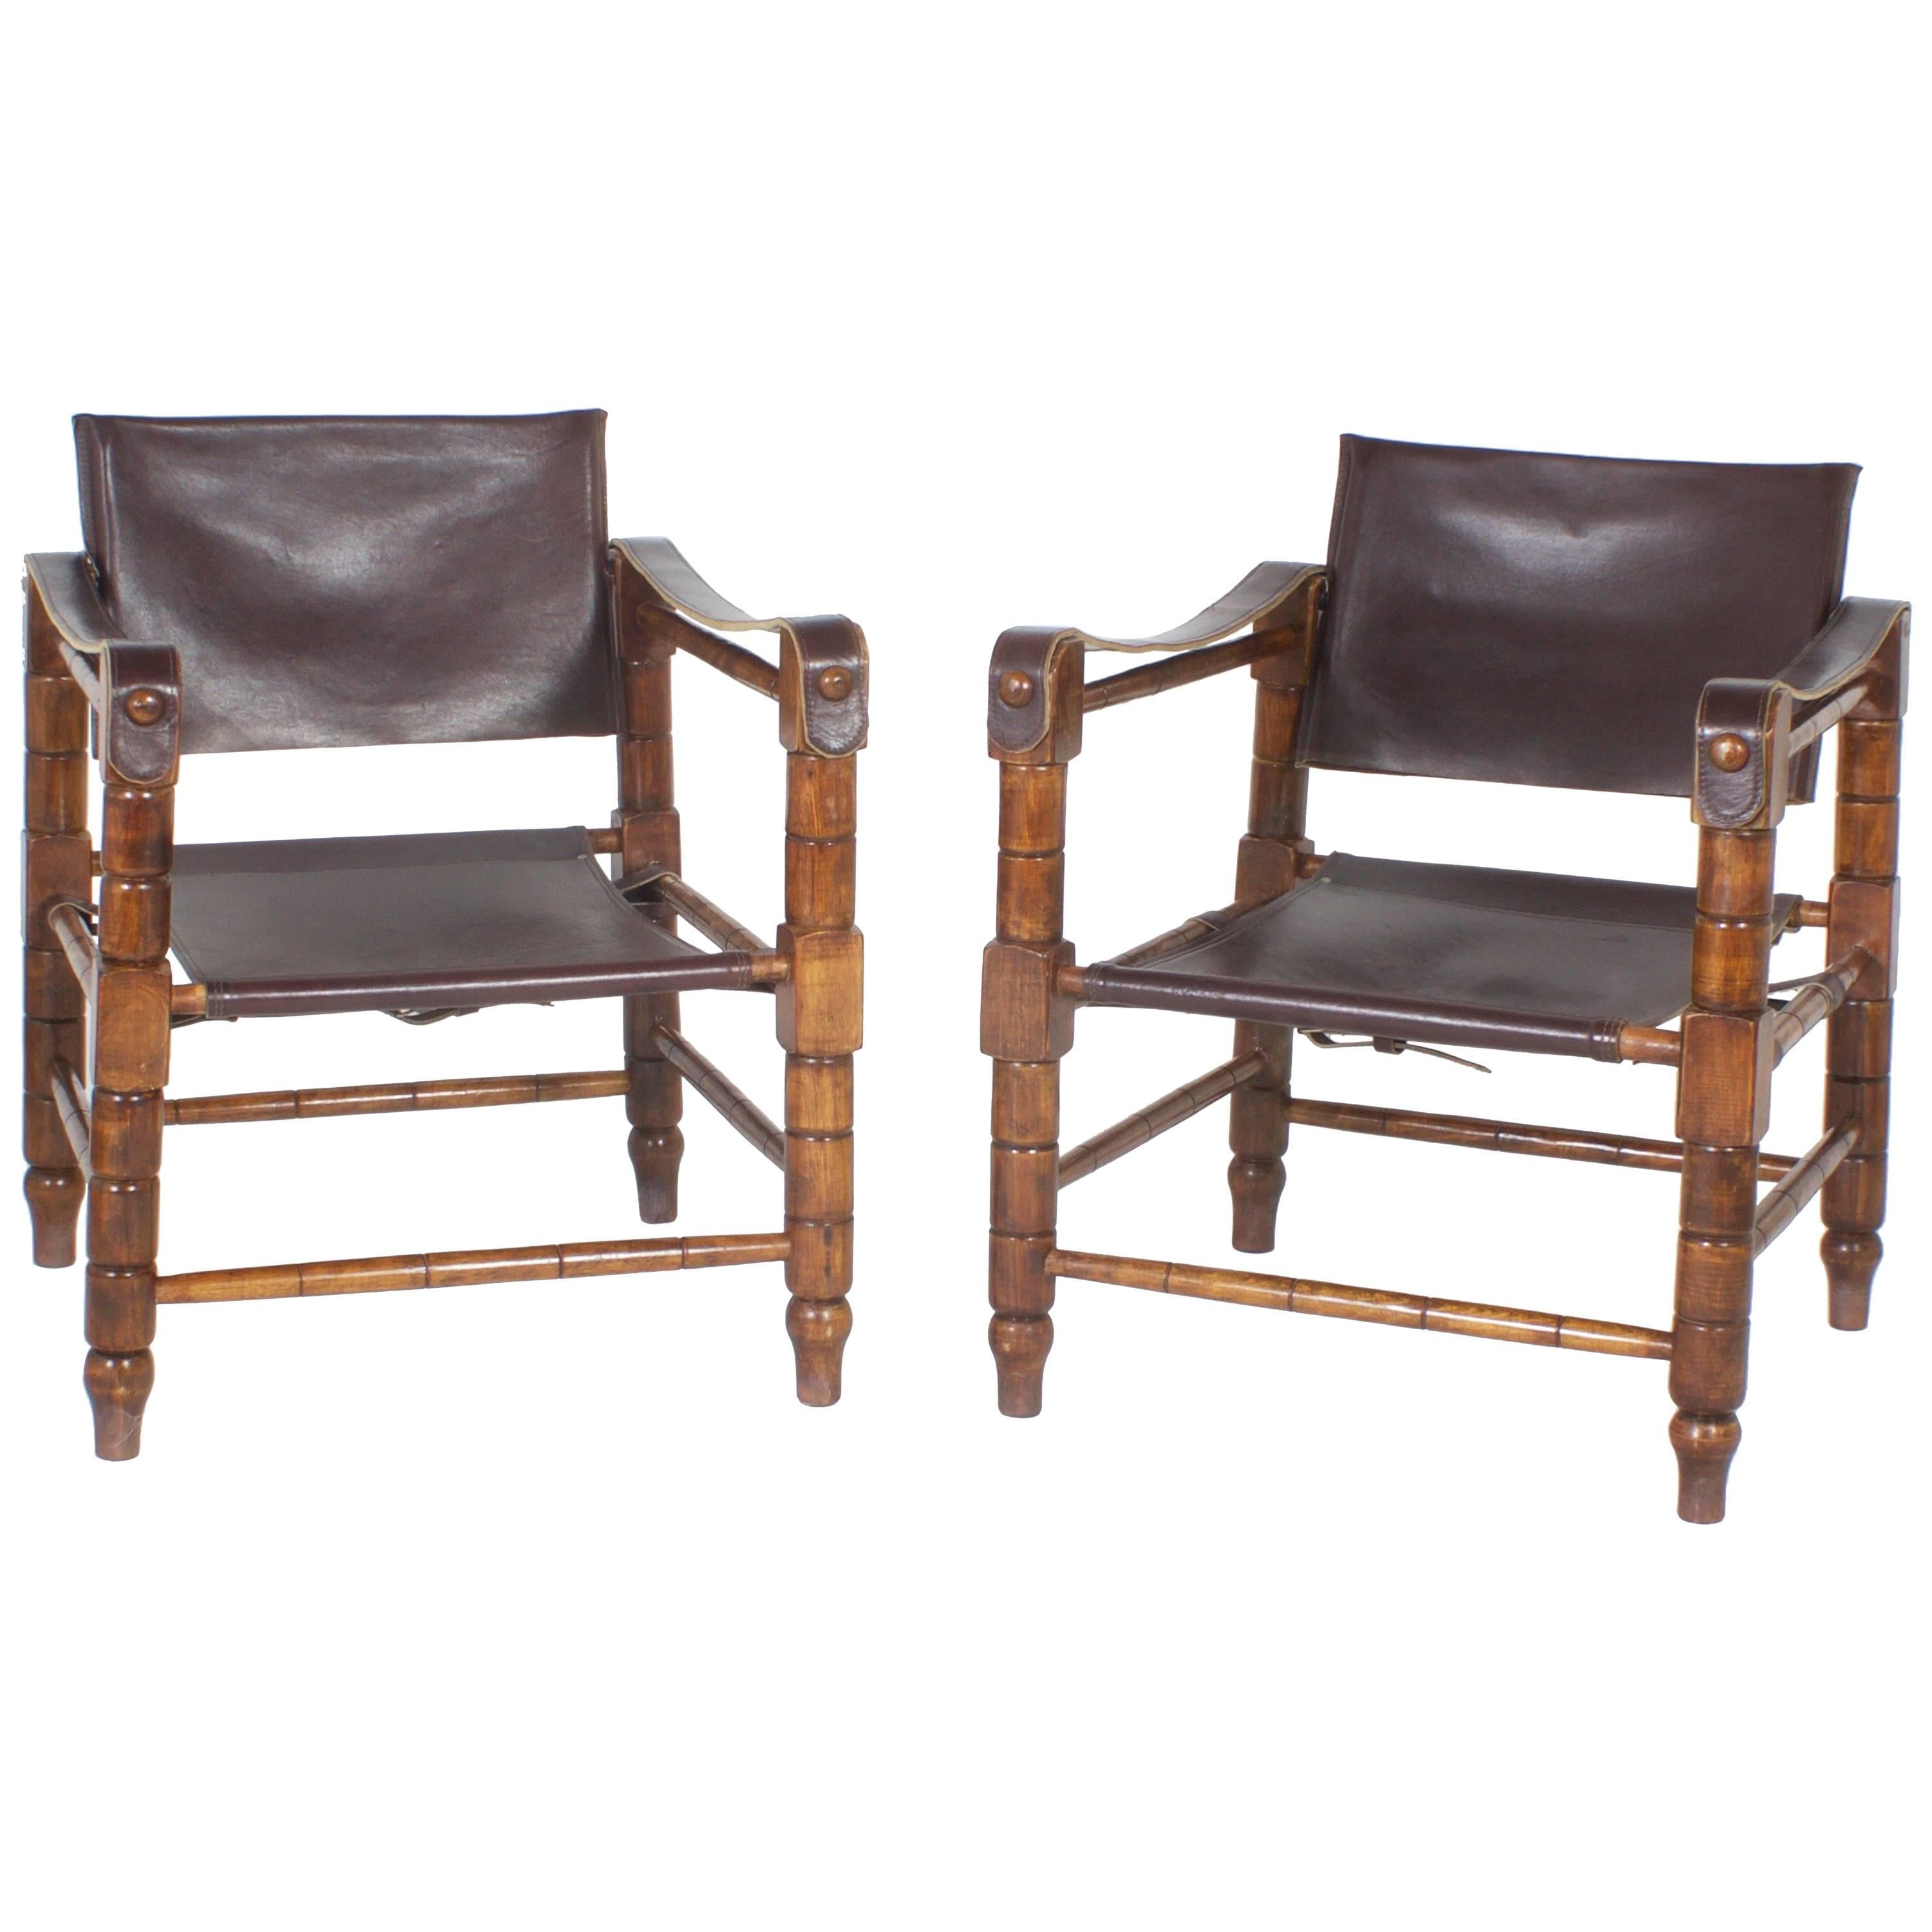 Handsome Pair of Brown Leather Campaign or Safari Chairs 